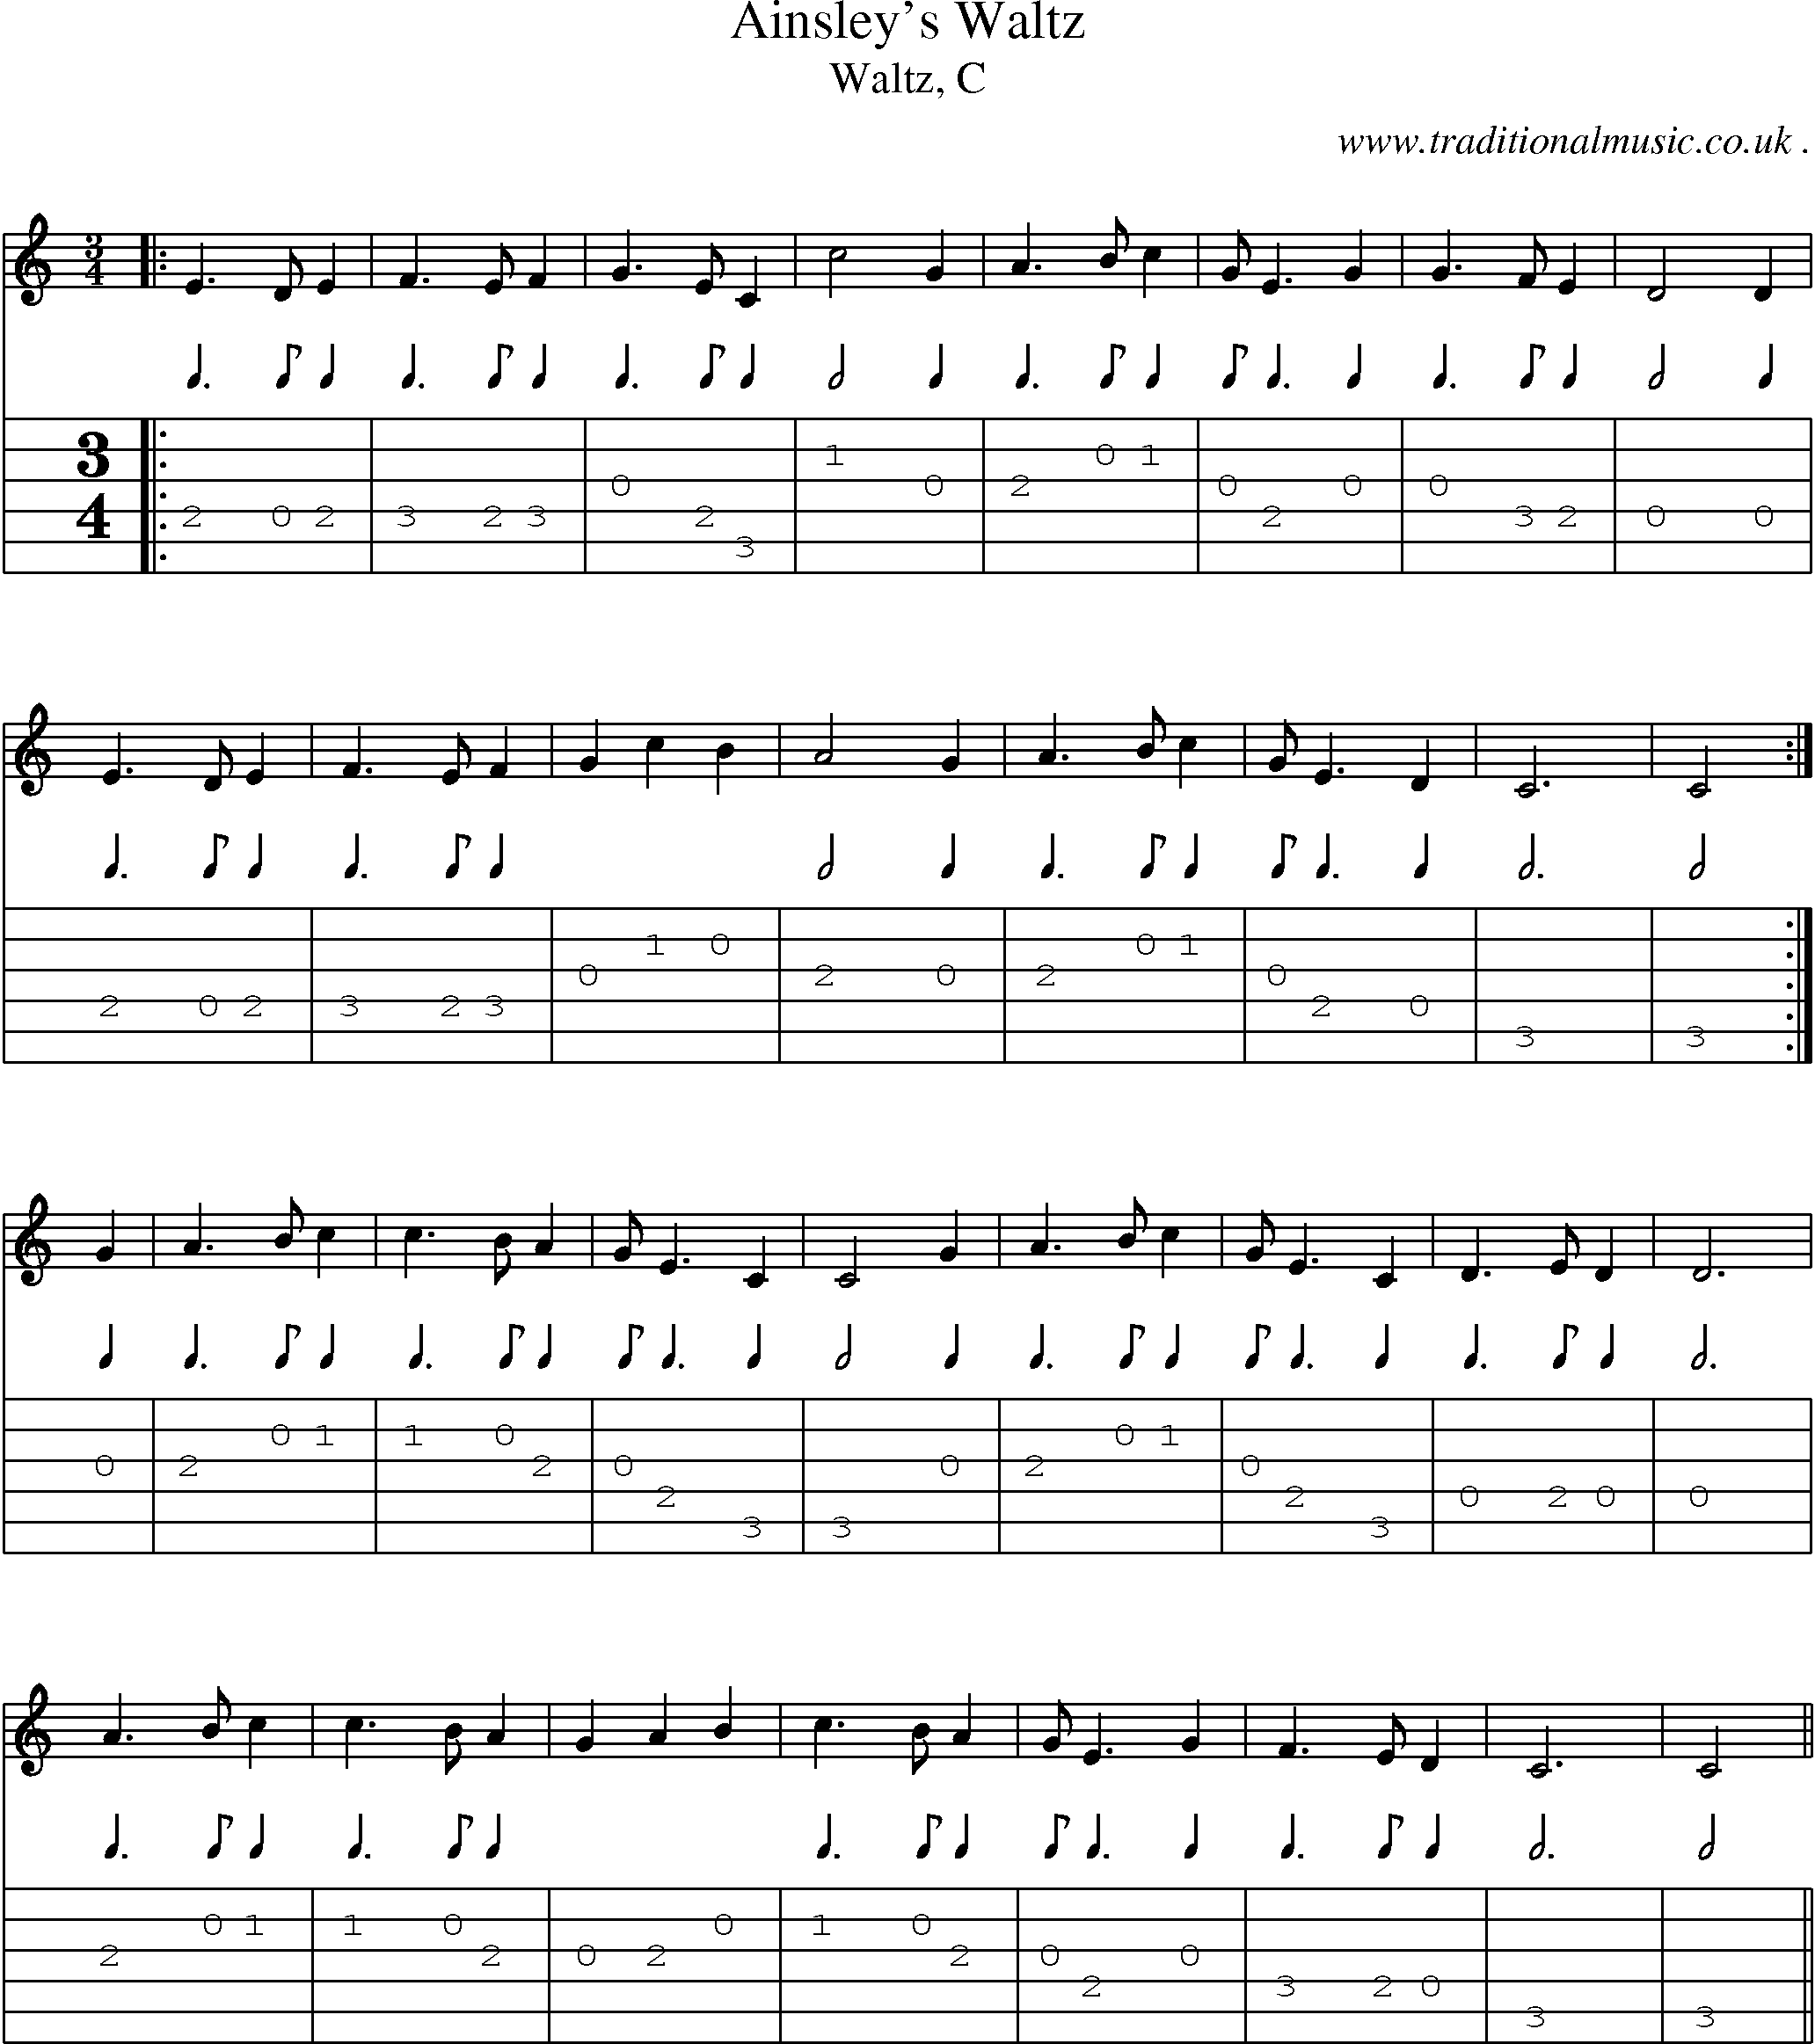 Sheet-music  score, Chords and Guitar Tabs for Ainsleys Waltz